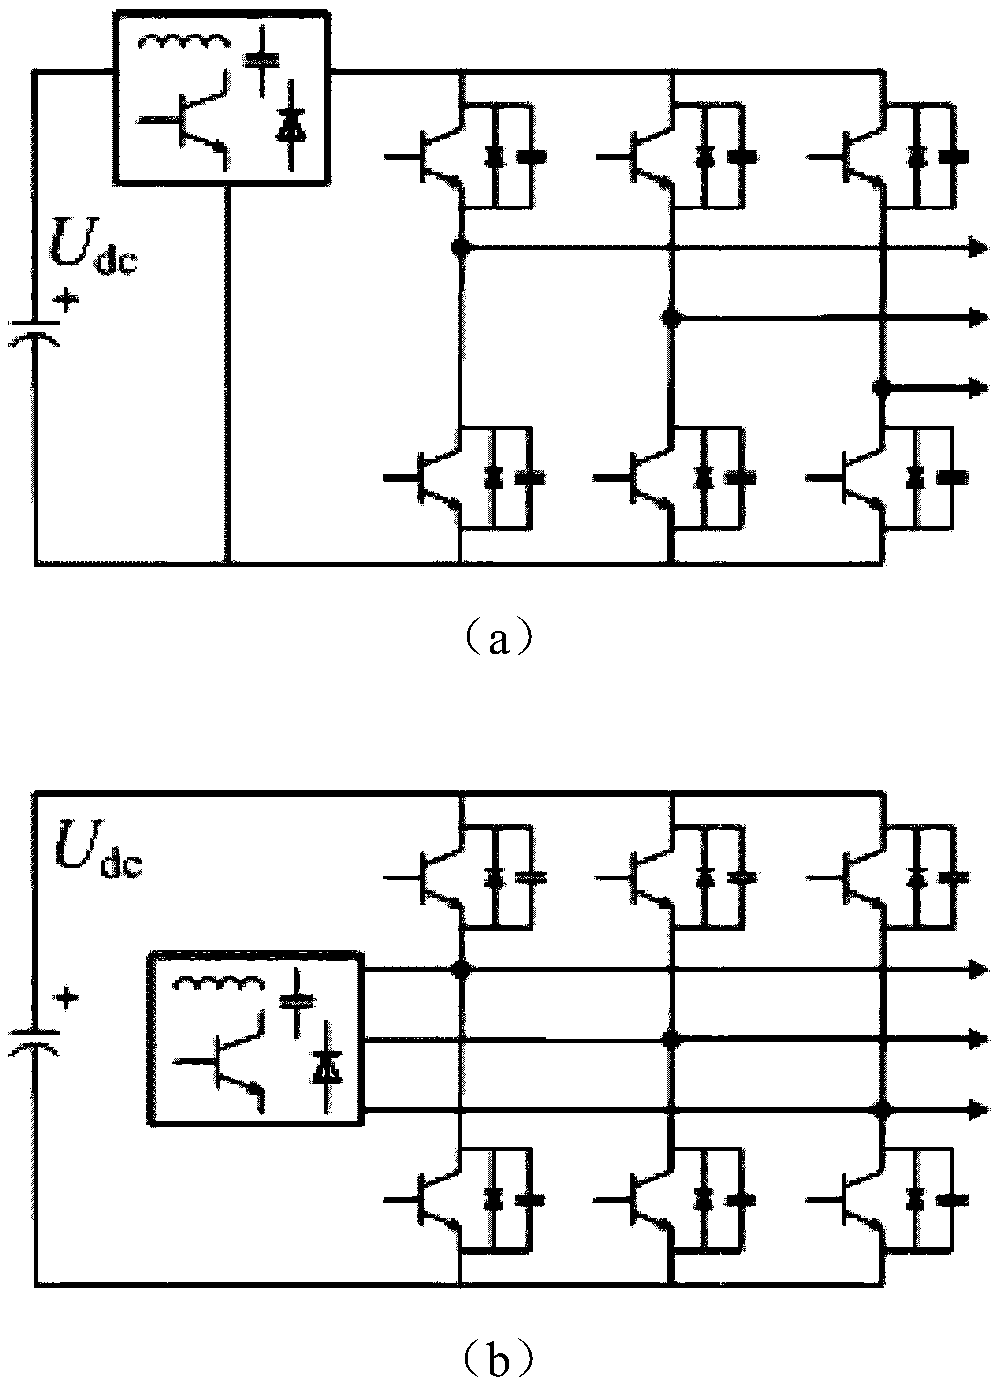 Soft-switch inverter circuit with constant common-mode voltage